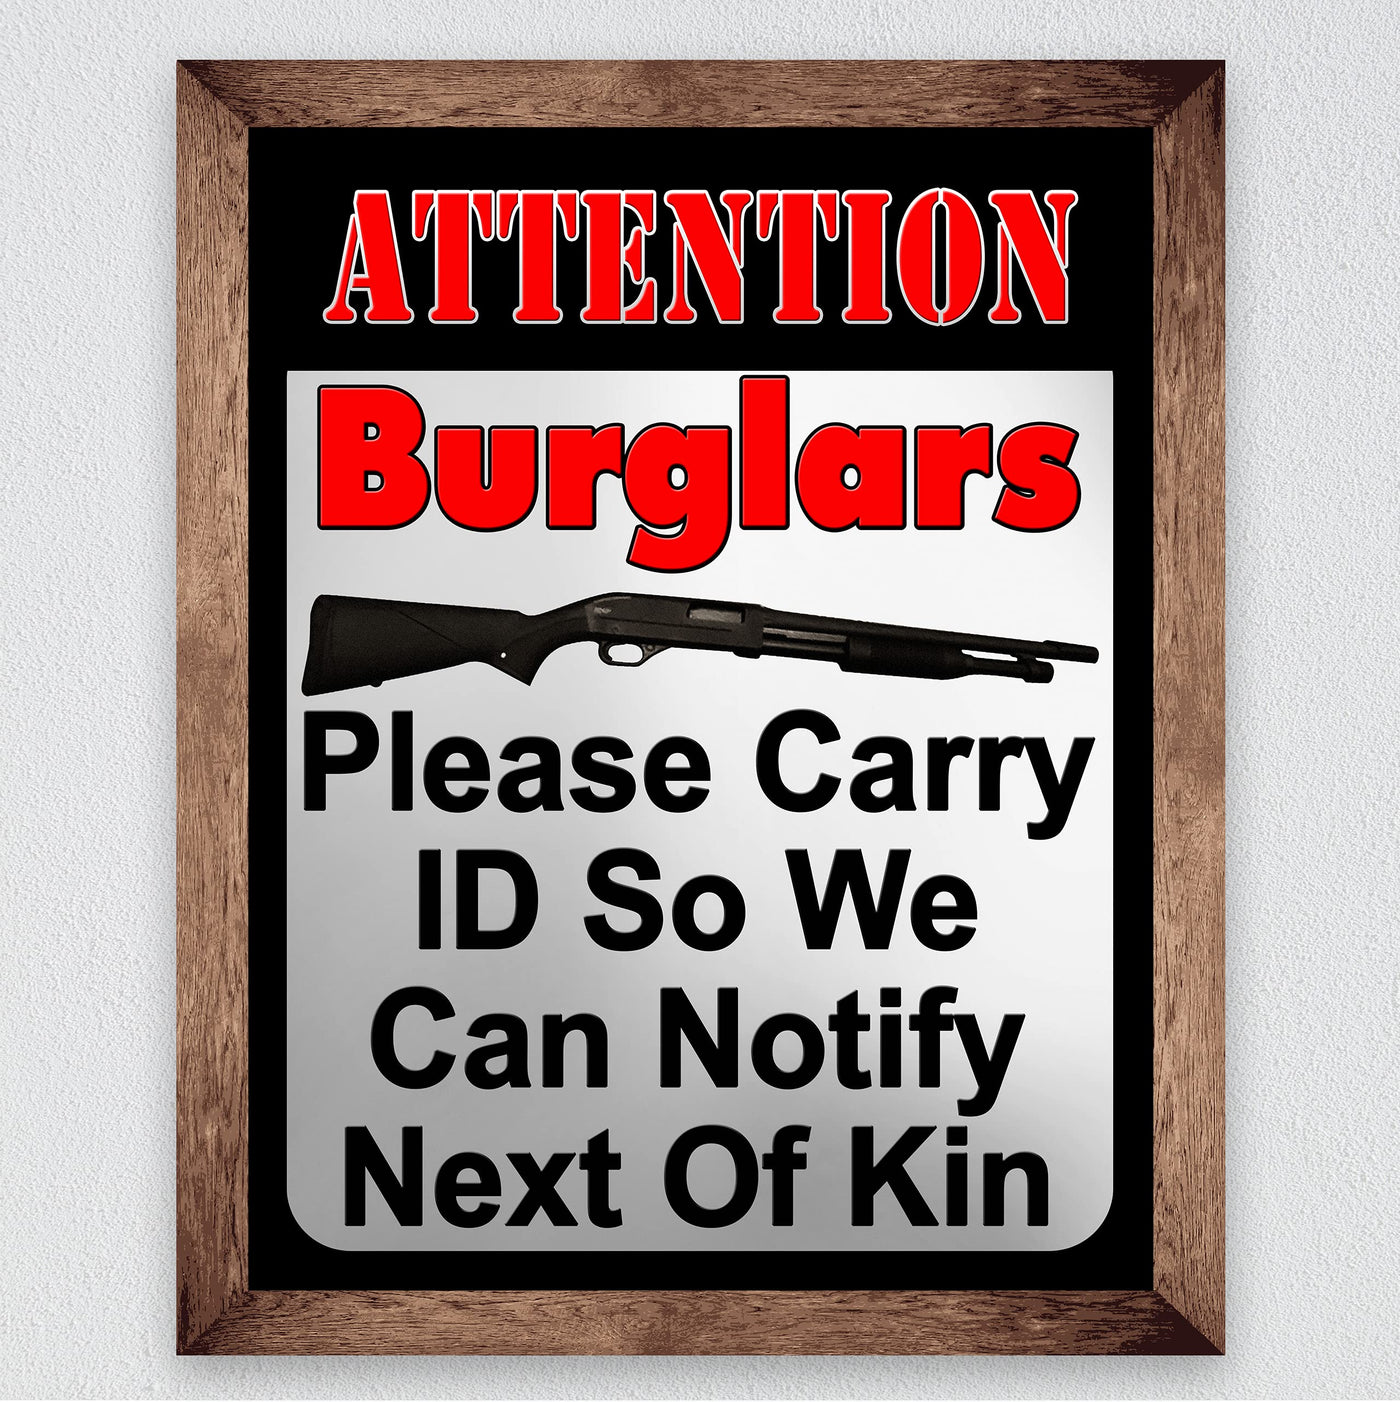 Attention Burglars-Carry ID So We Can Notify Next of Kin-Funny Wall Art -8 x 10" Gun Security Print-Ready to Frame. Home-Cave-Garage-Shop Decor. Great Sign for Front Door! Printed on Photo Paper.